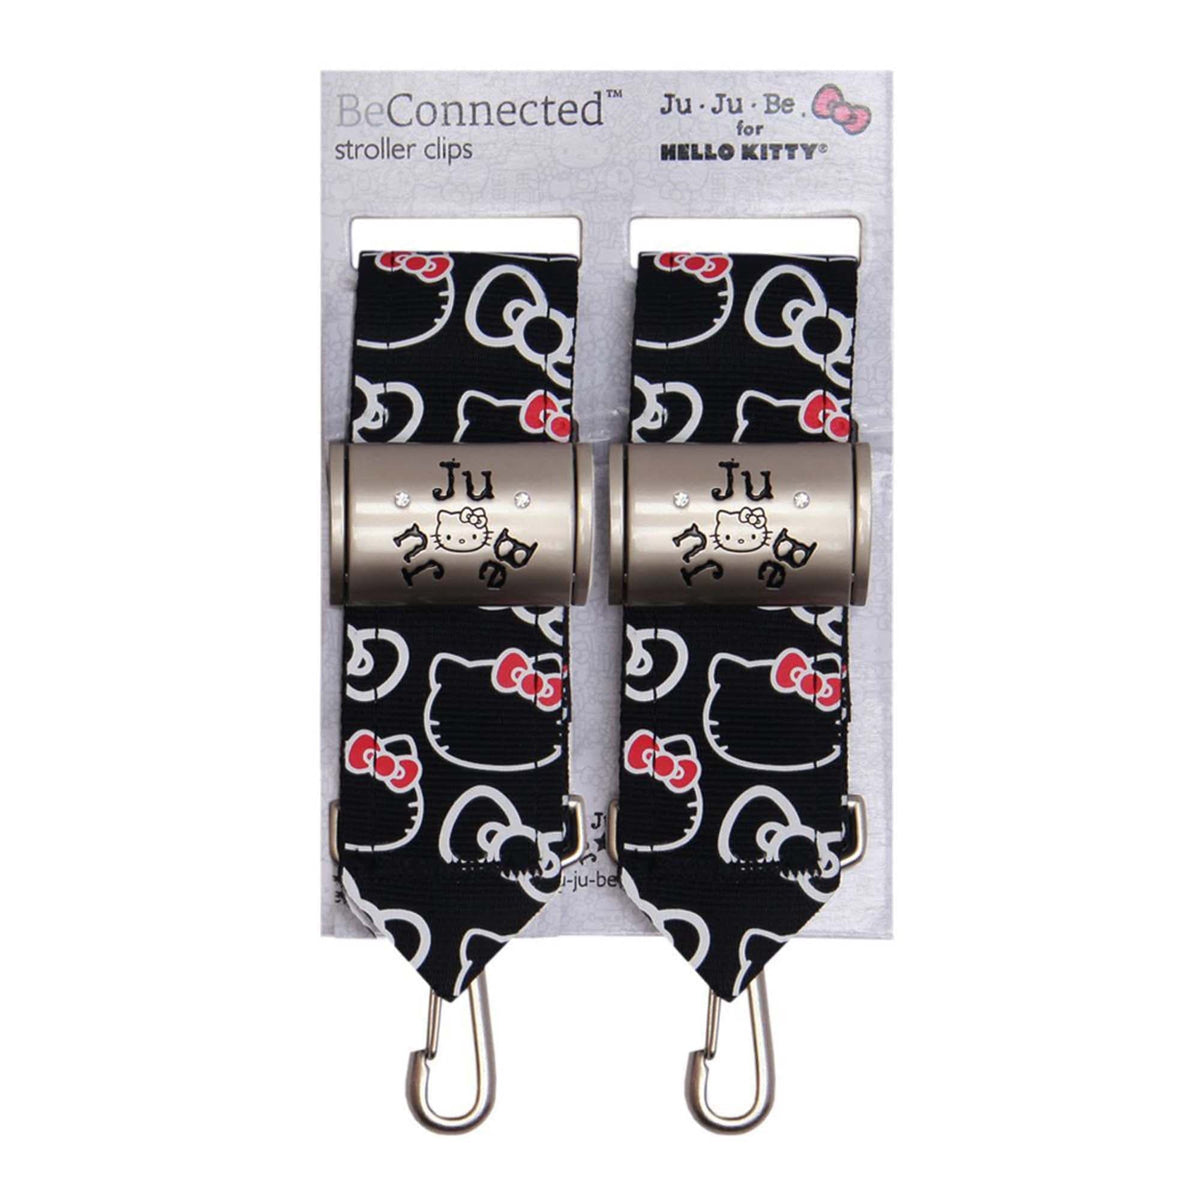 Ju-Ju-Be Hello Kitty Be Connected Diaper Bag Stroller Clips